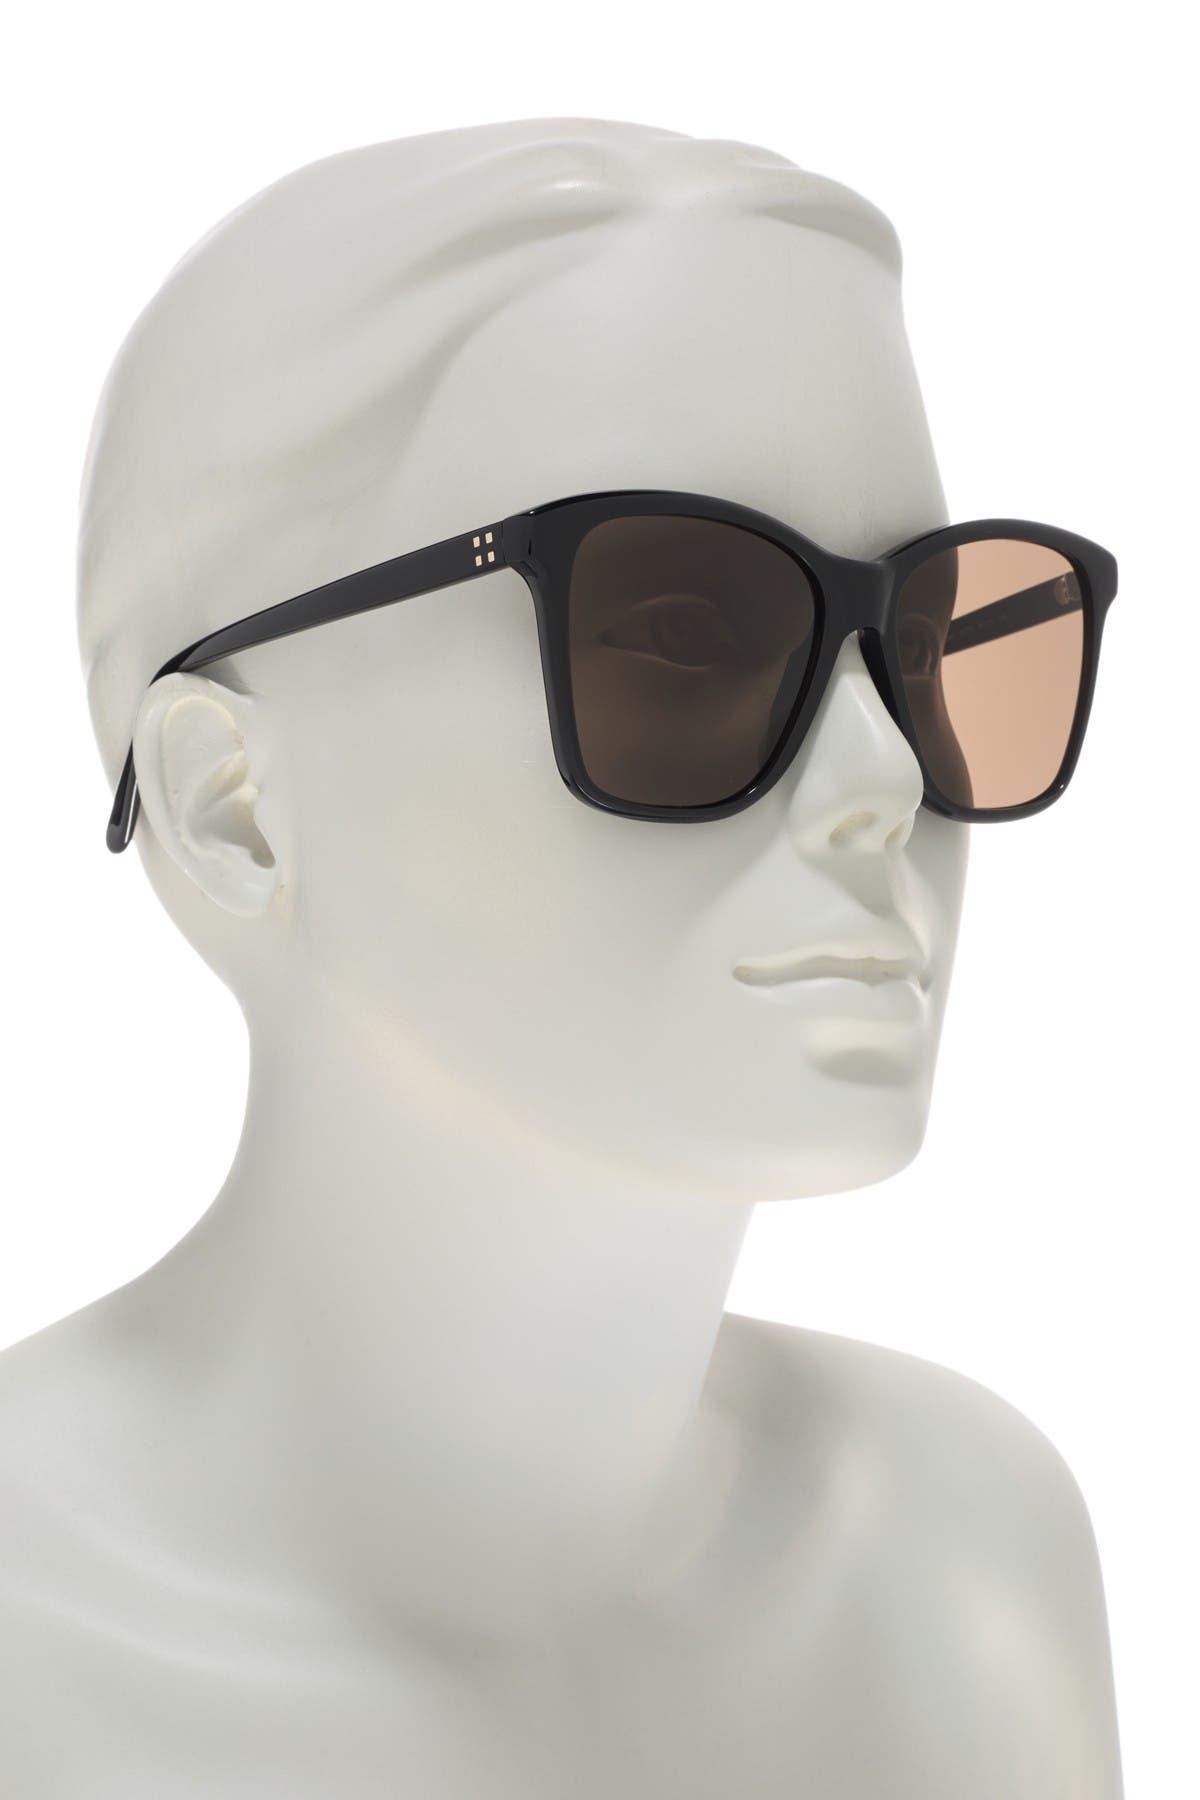 Givenchy | 55mm Square Sunglasses 